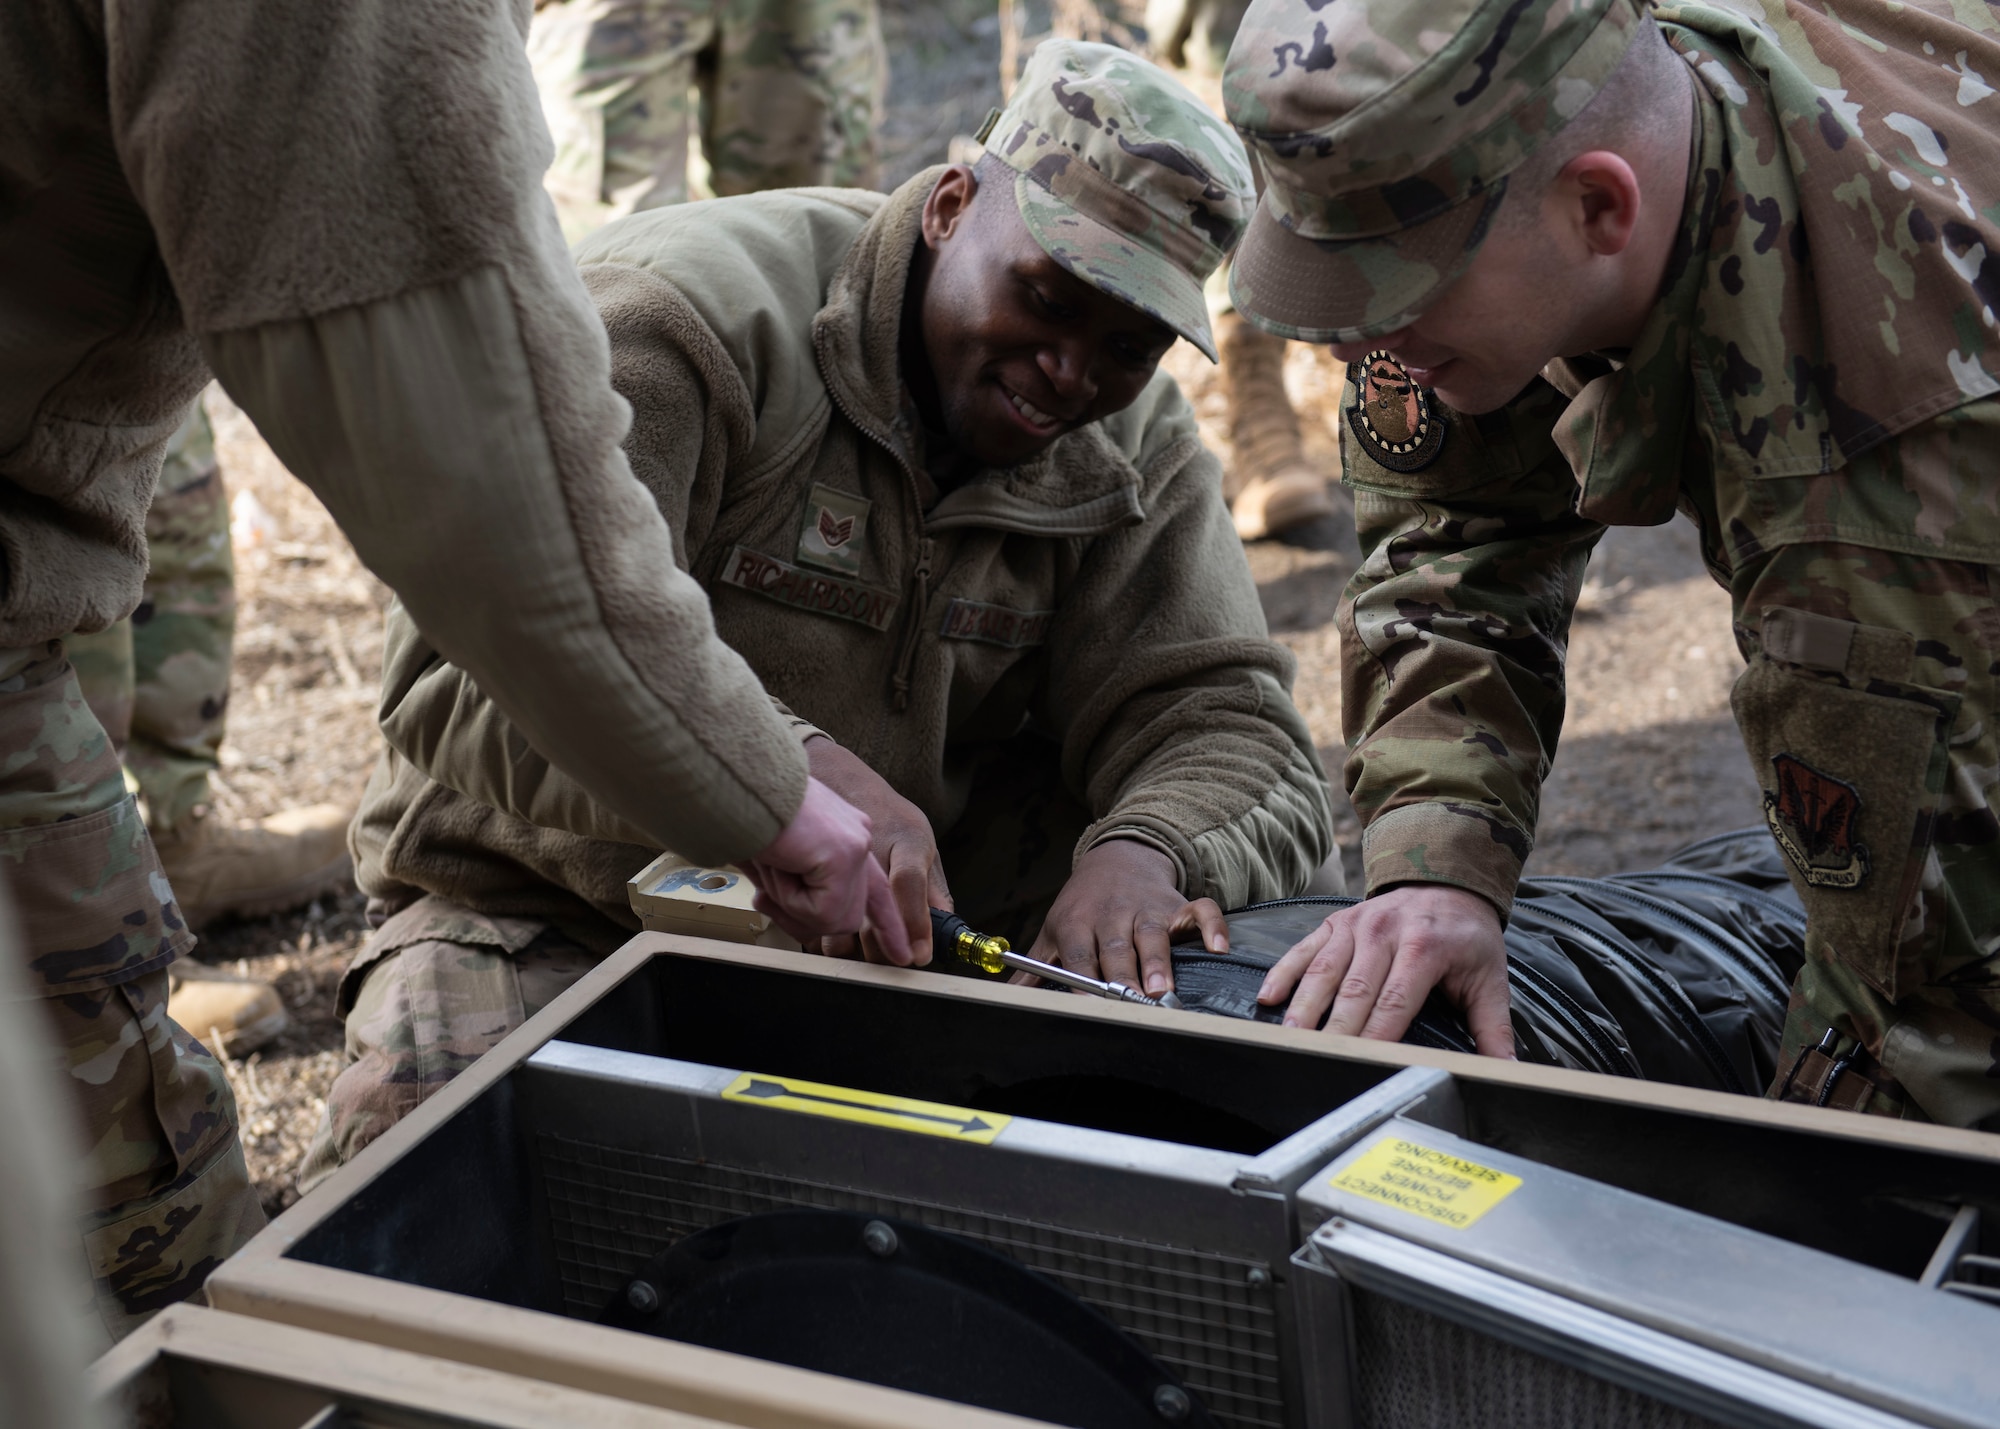 Staff Sgt. David Richardson, 366th Civil Engineer Squadron, learns how to assemble a heating, ventalation and air-conditioning unit during a multi-capable Airman training, Jan. 23, 2020, at Mountain Home Air Force Base, Idaho. This training was conducted to equip Airman with skills from other career fields to enhance their readiness. (U.S. Air Force photo by Senior Airman Tyrell Hall)